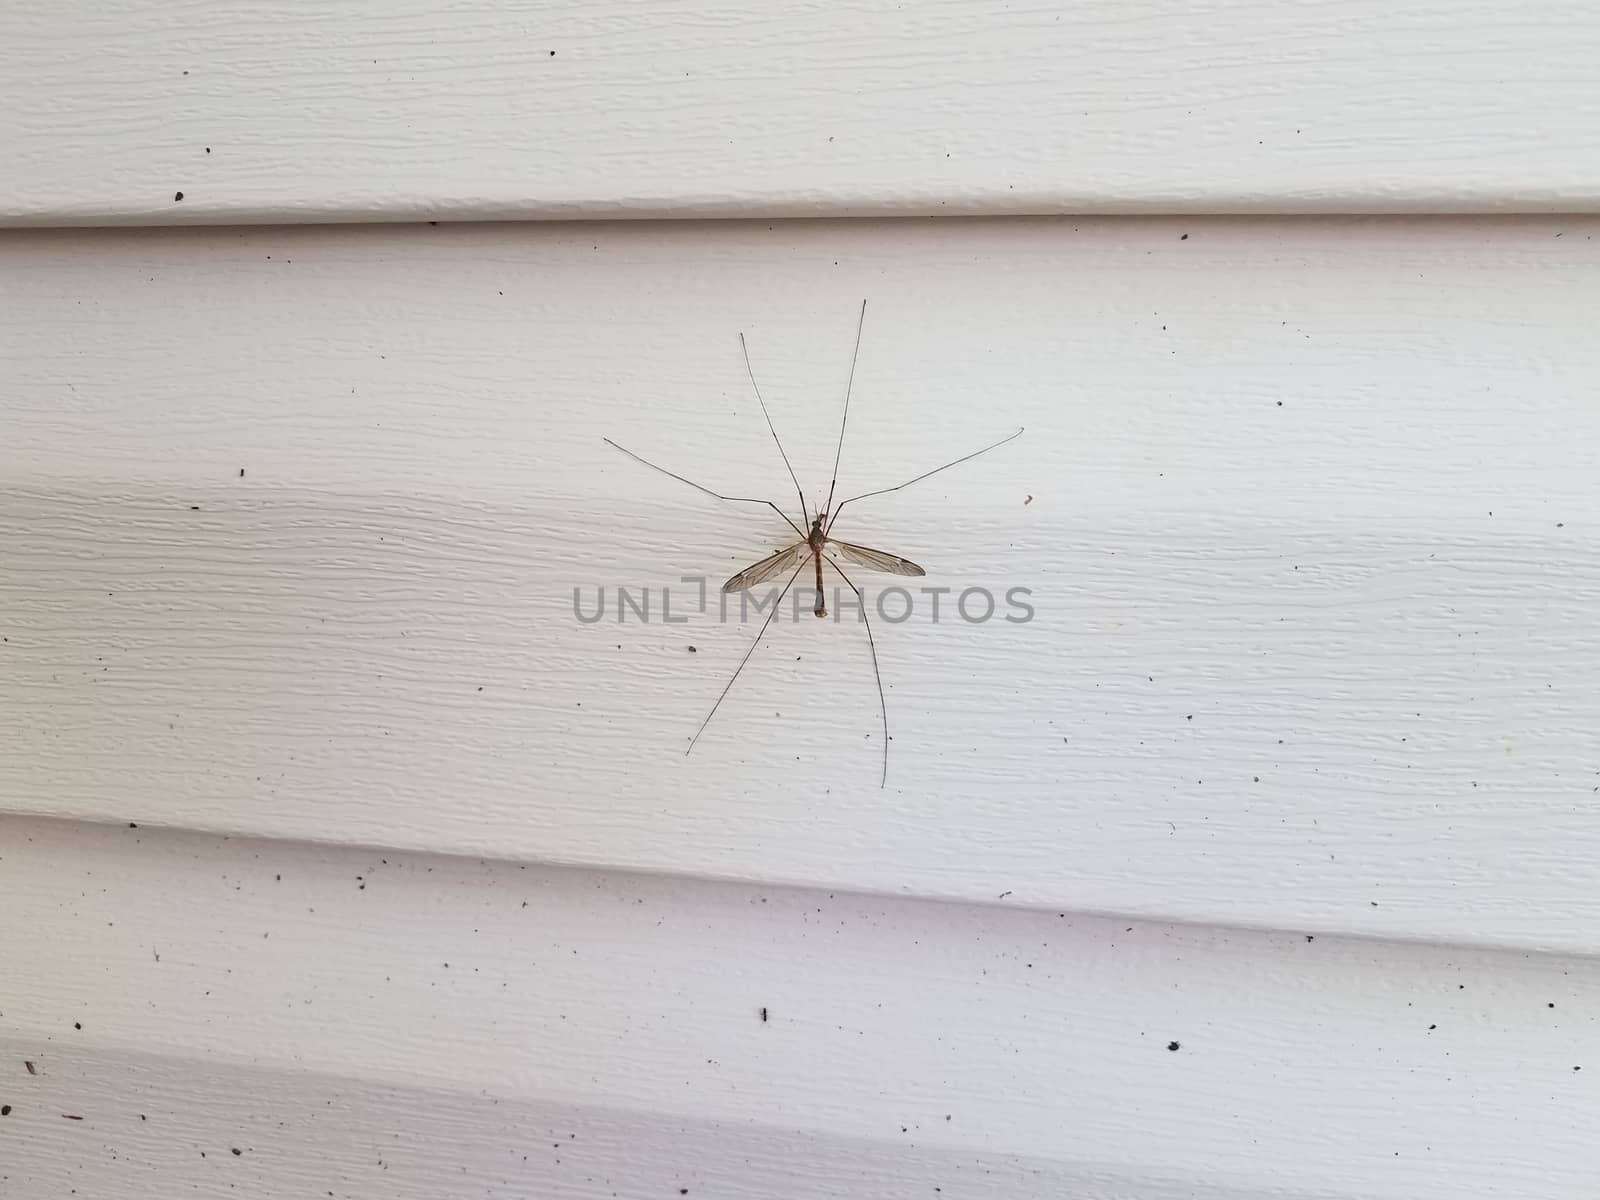 large crane fly or mosquito eater insect on white house siding